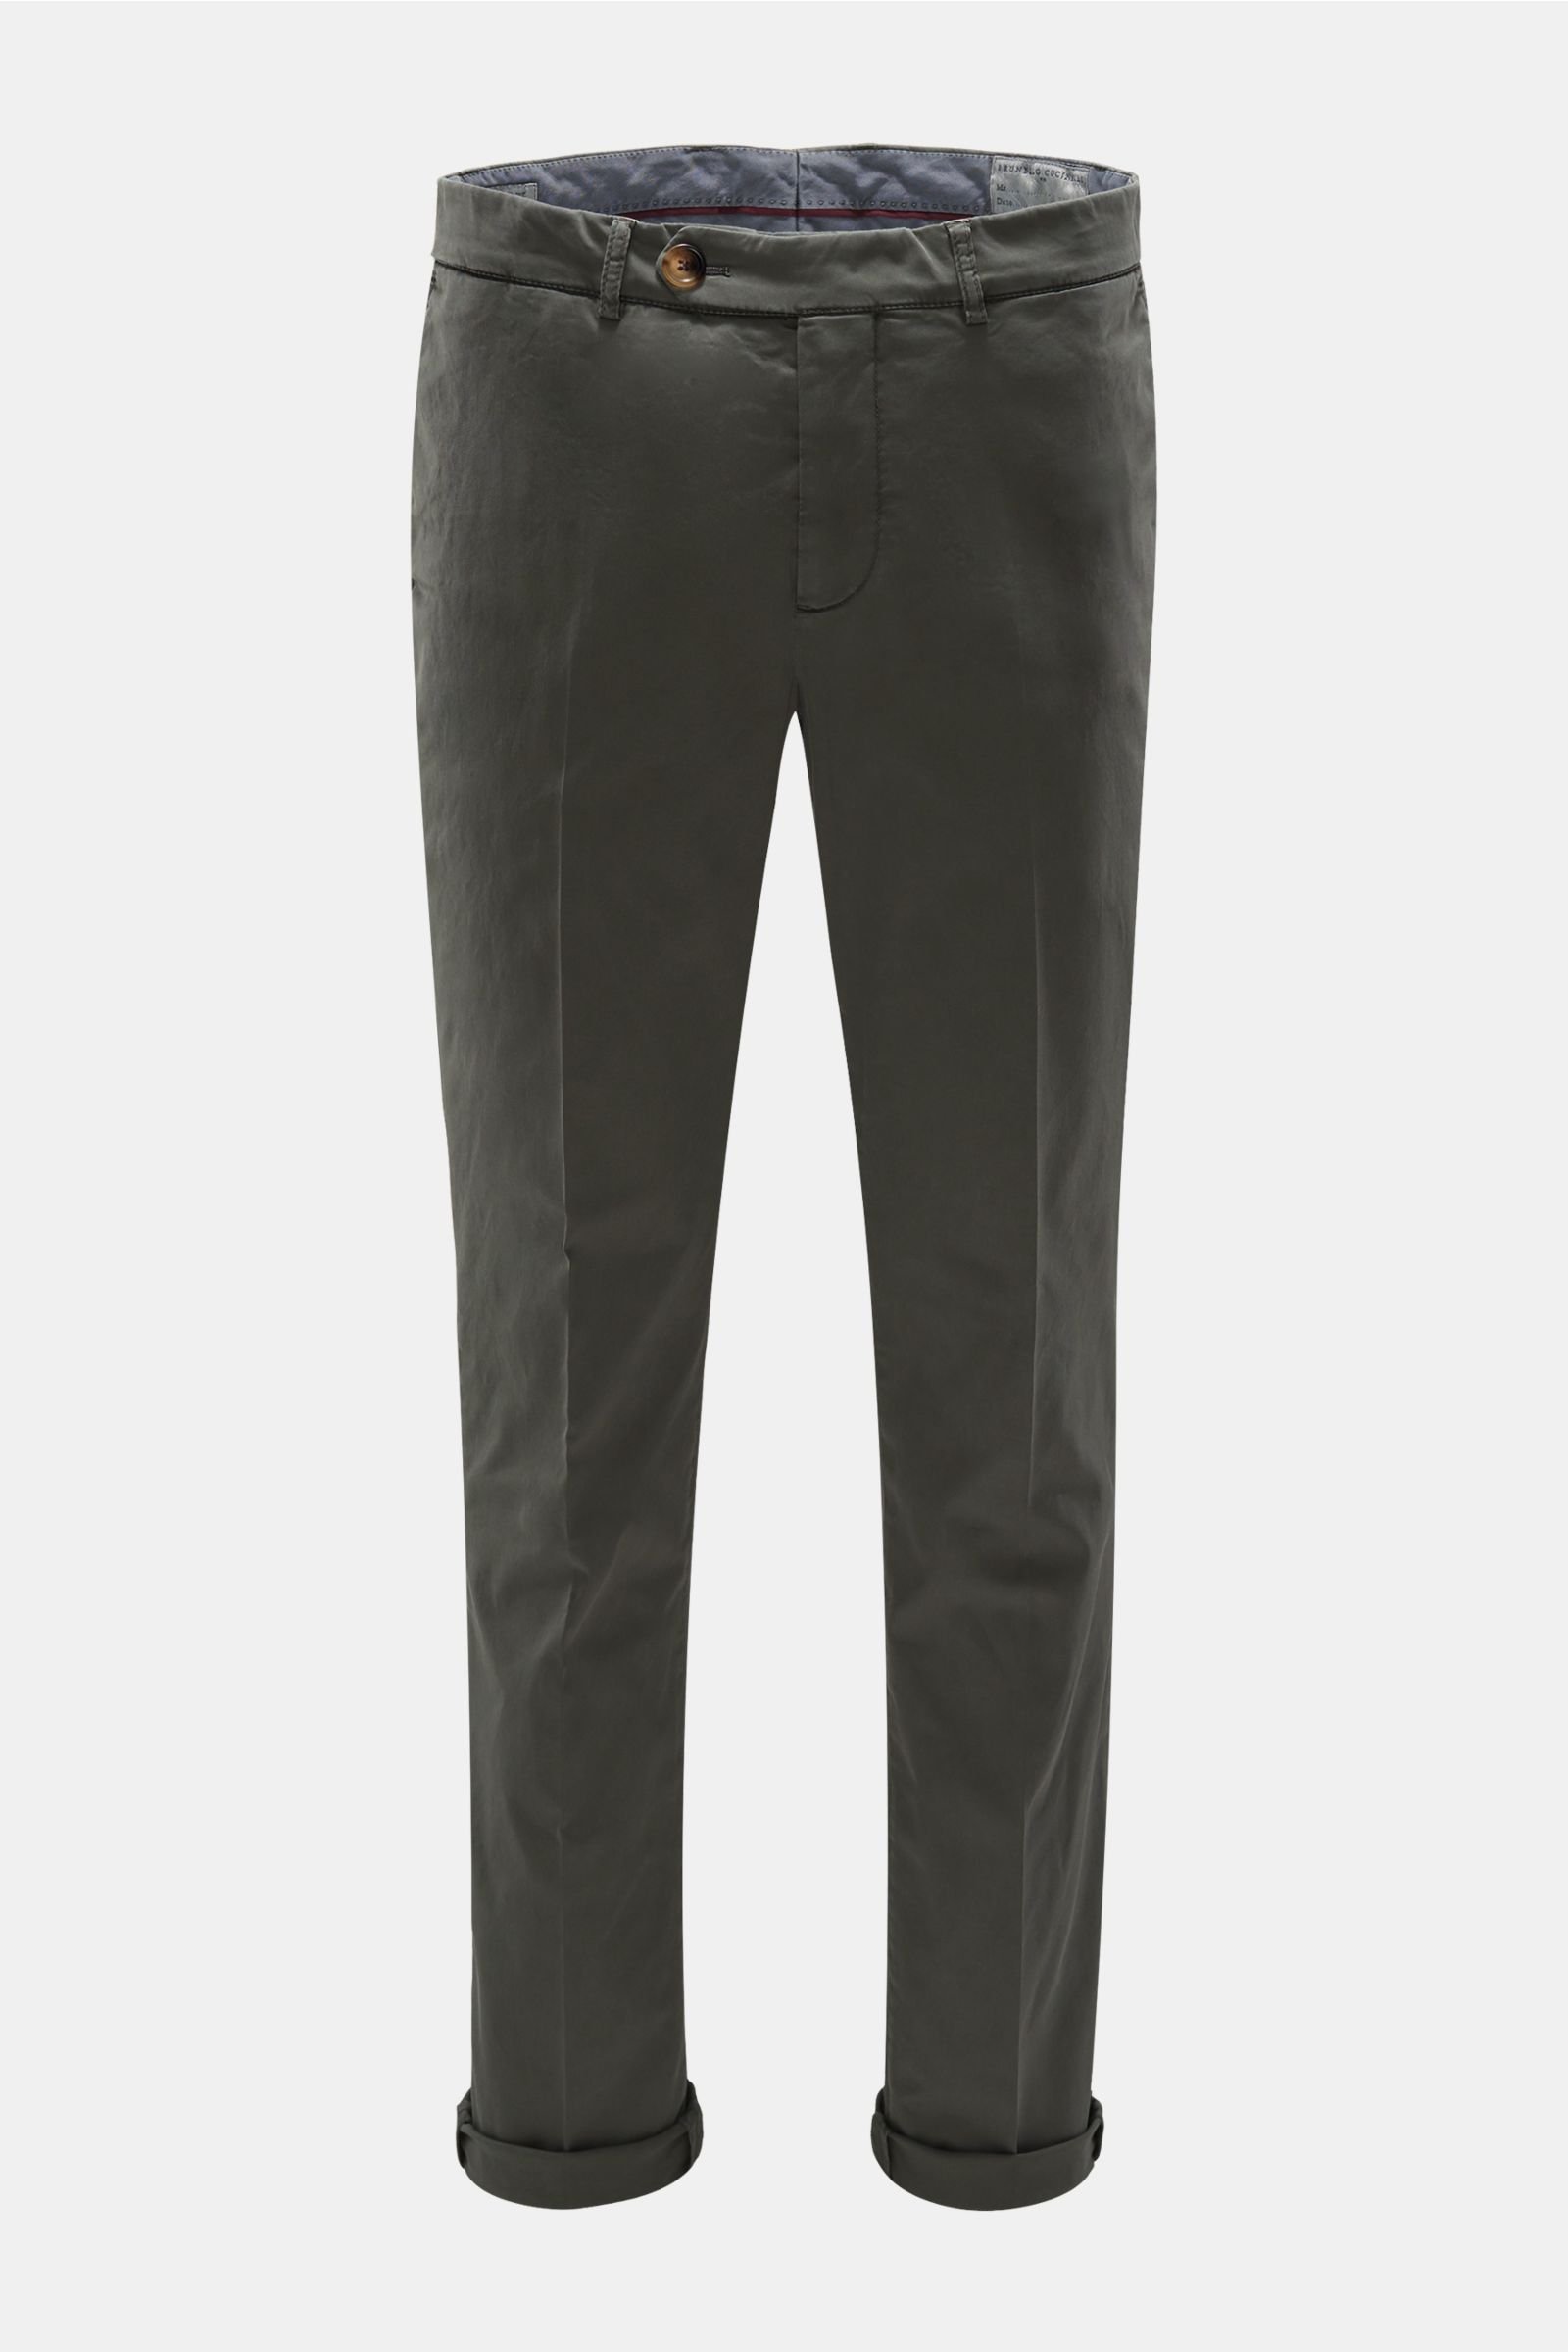 Chinos 'Traditional Fit' grey-green